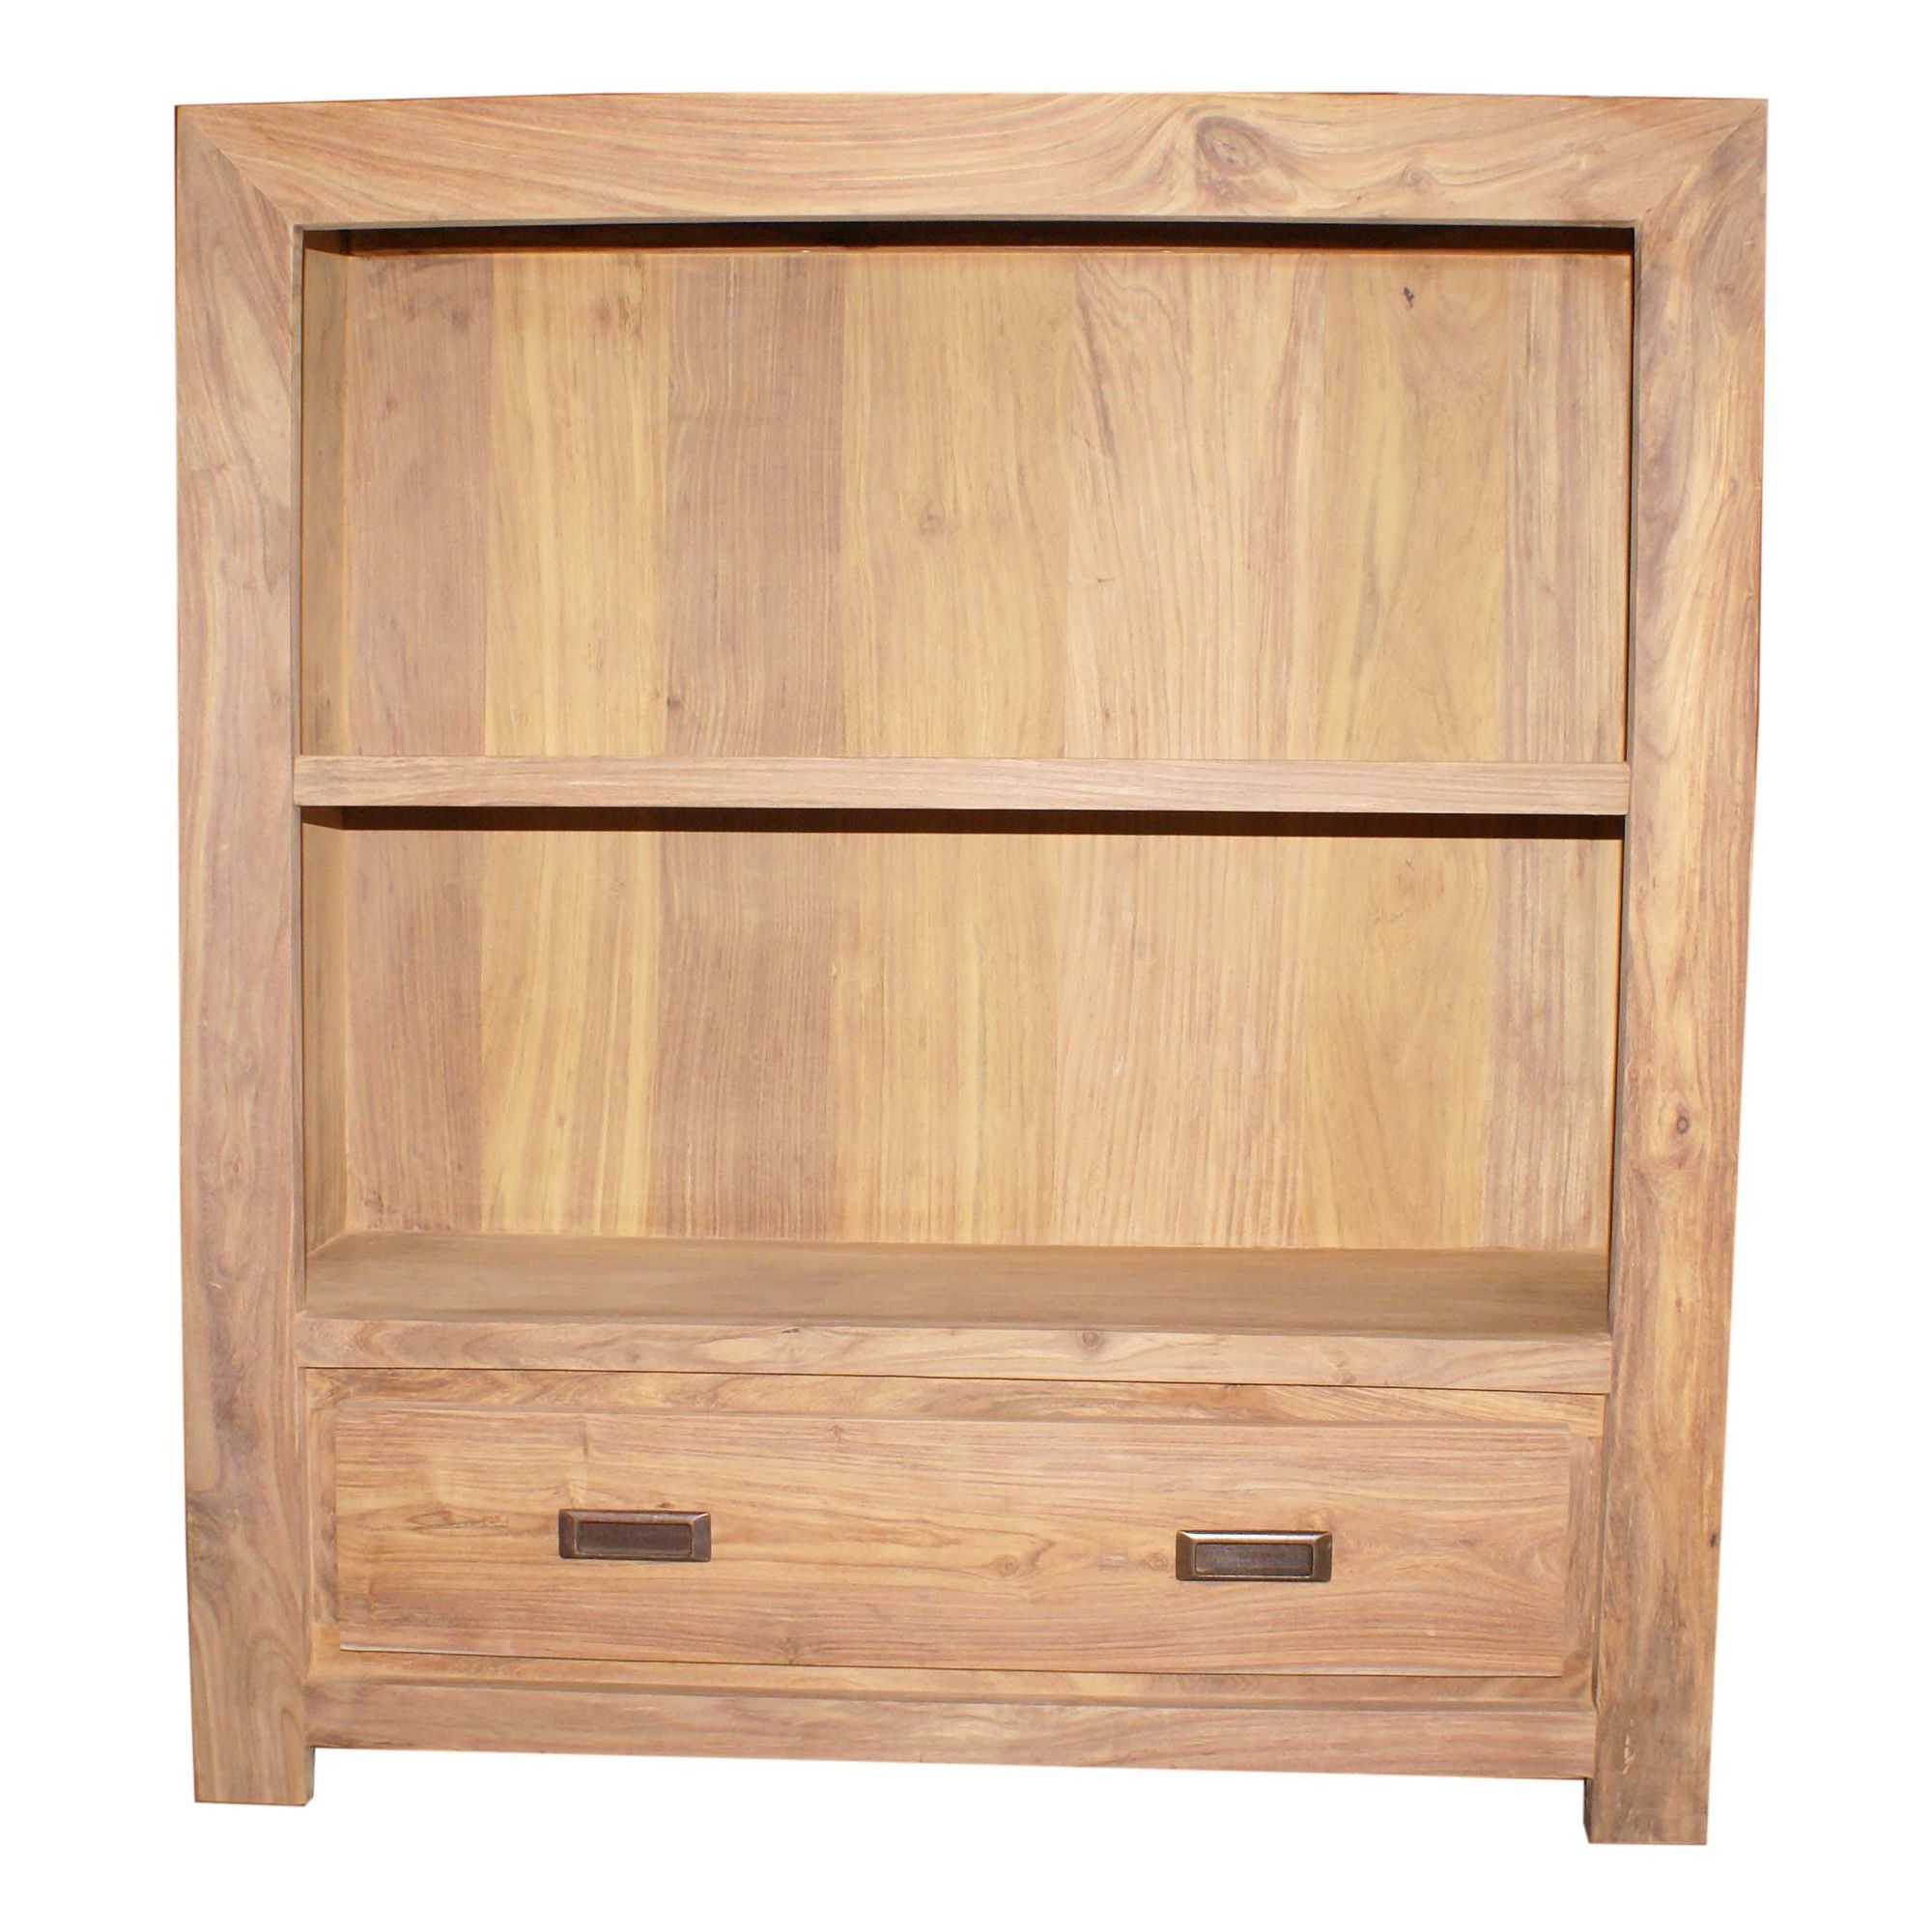 Wiseaction Lingfield Low Wide Bookcase with One Drawer at Tesco Direct